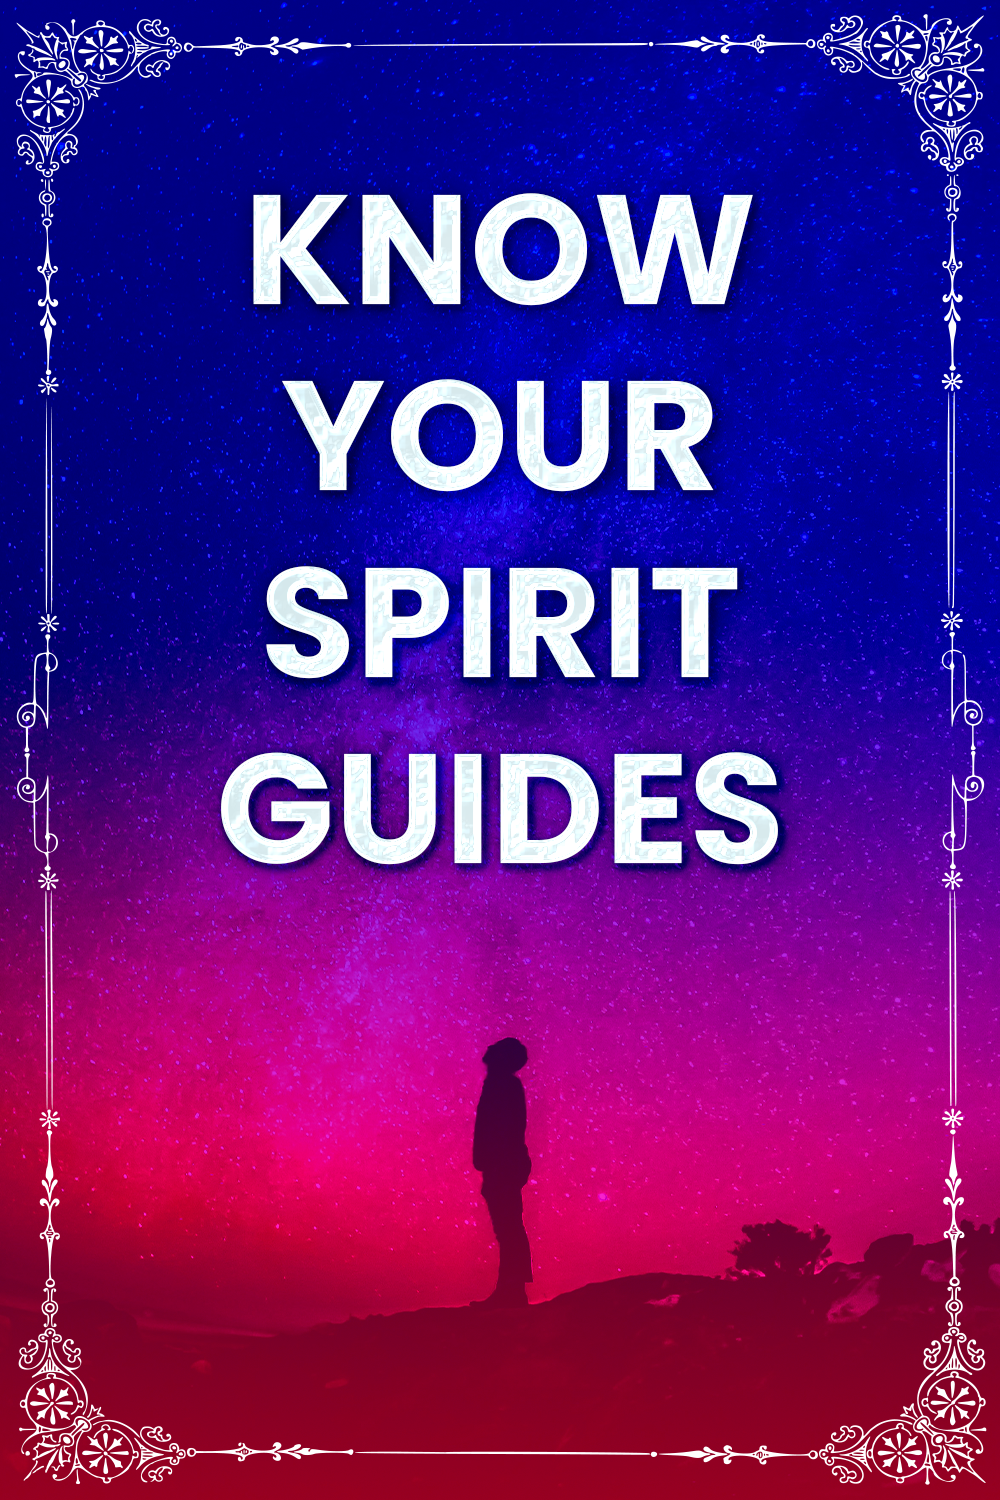 How can find and connect our Spirit Guides?